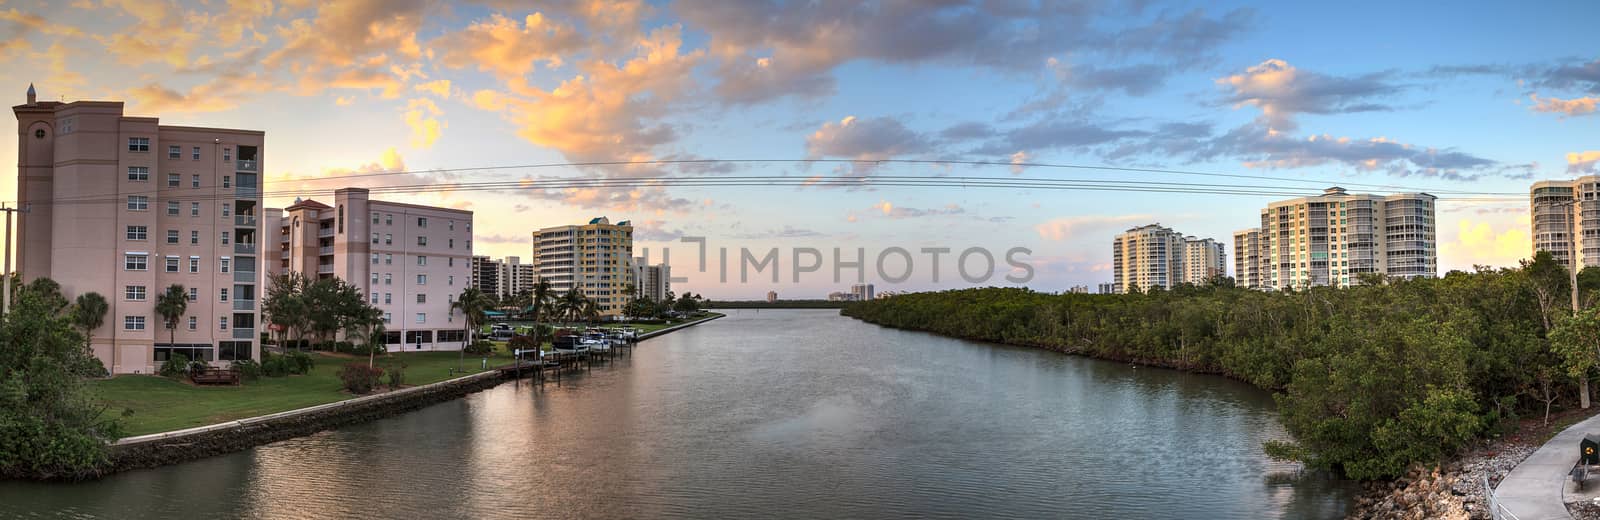 Sunset sky and clouds over the Vanderbilt Channel river by steffstarr